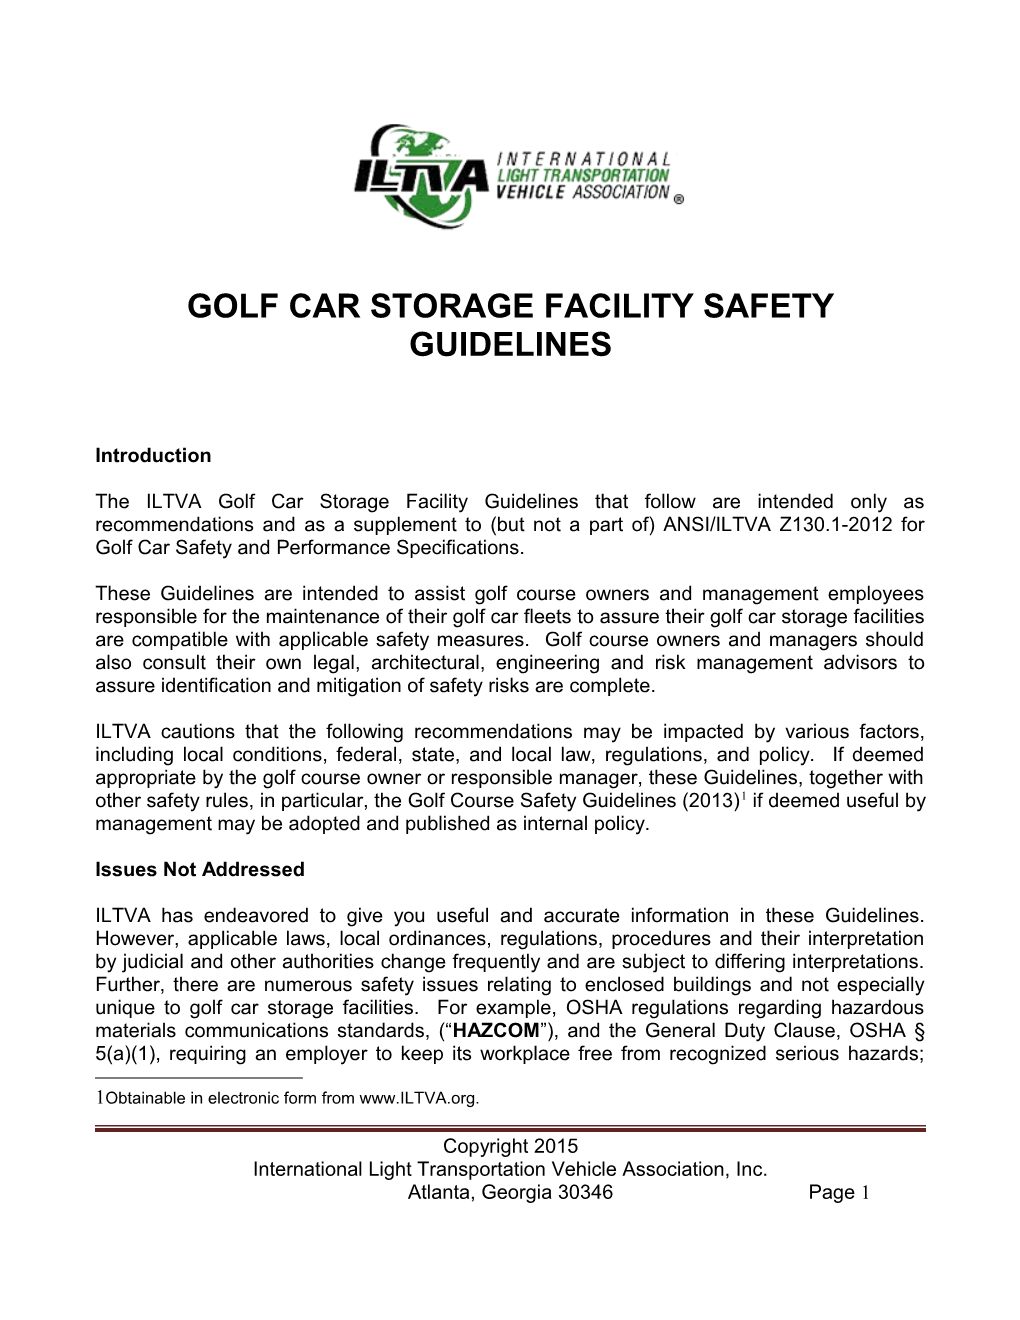 Golf Car Storage Facility Safety Guidelines